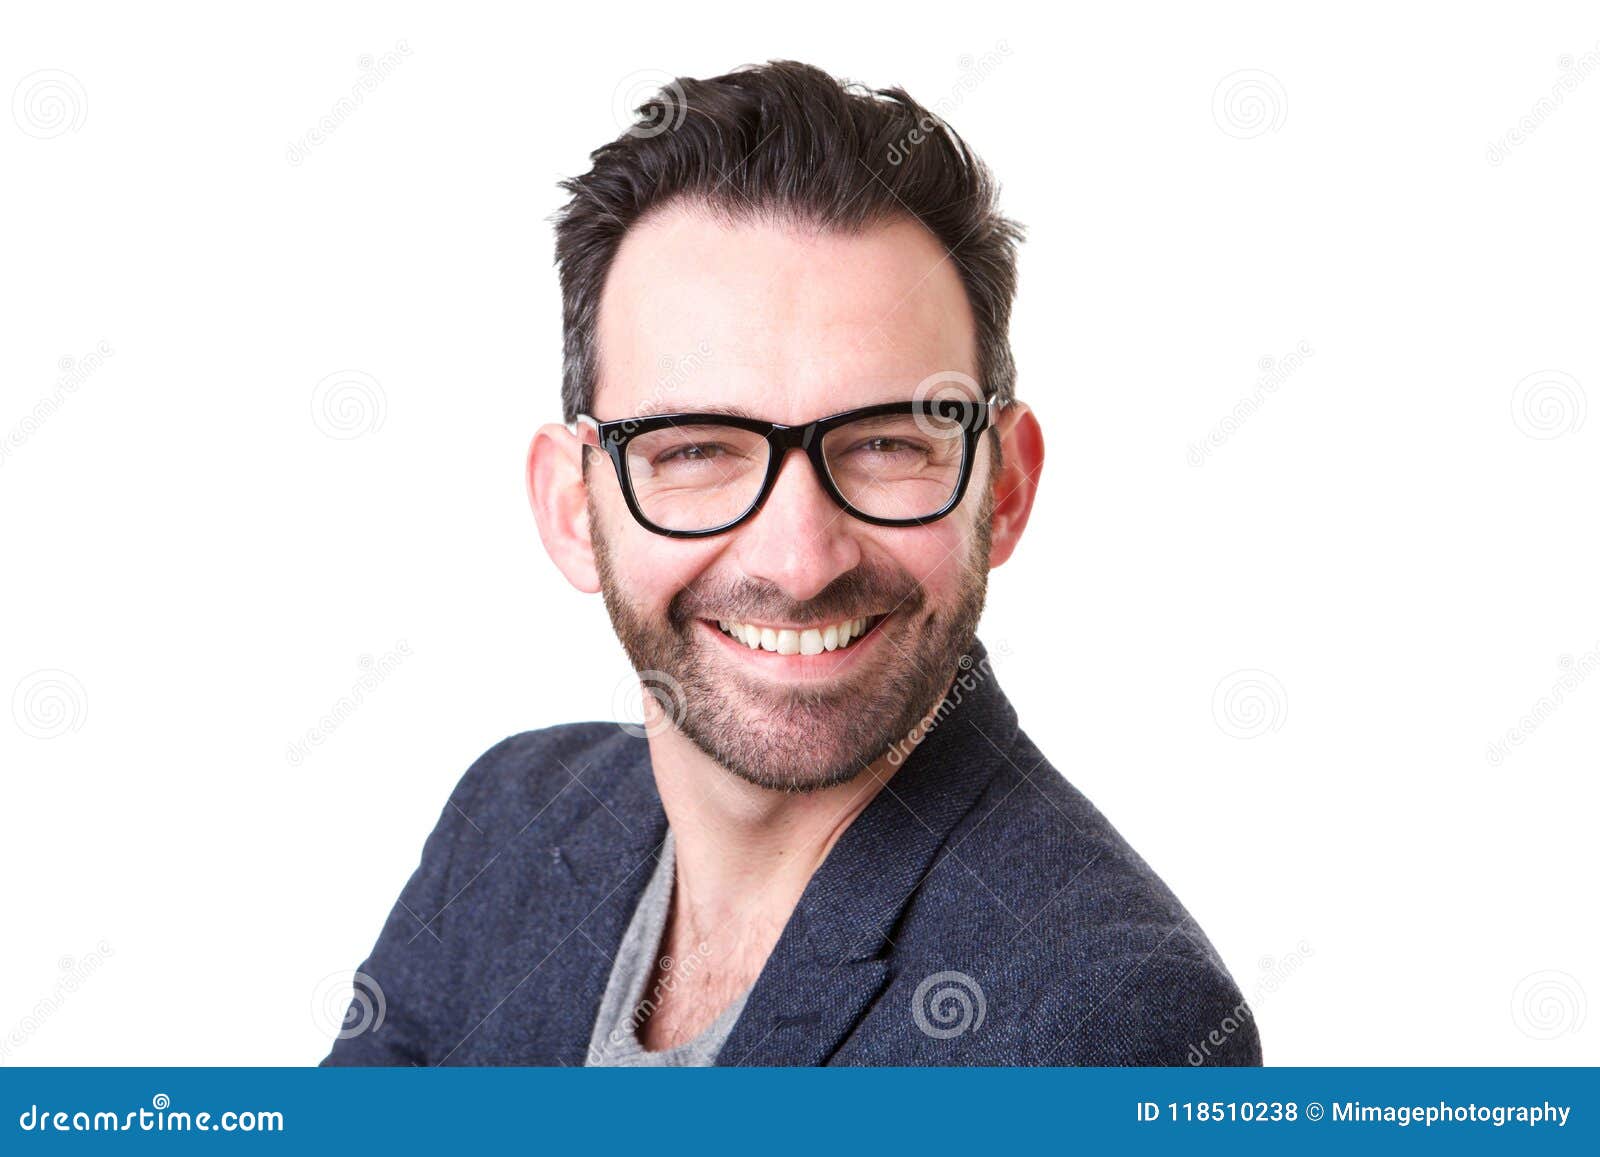 close up middle age man with glasses smiling against white background